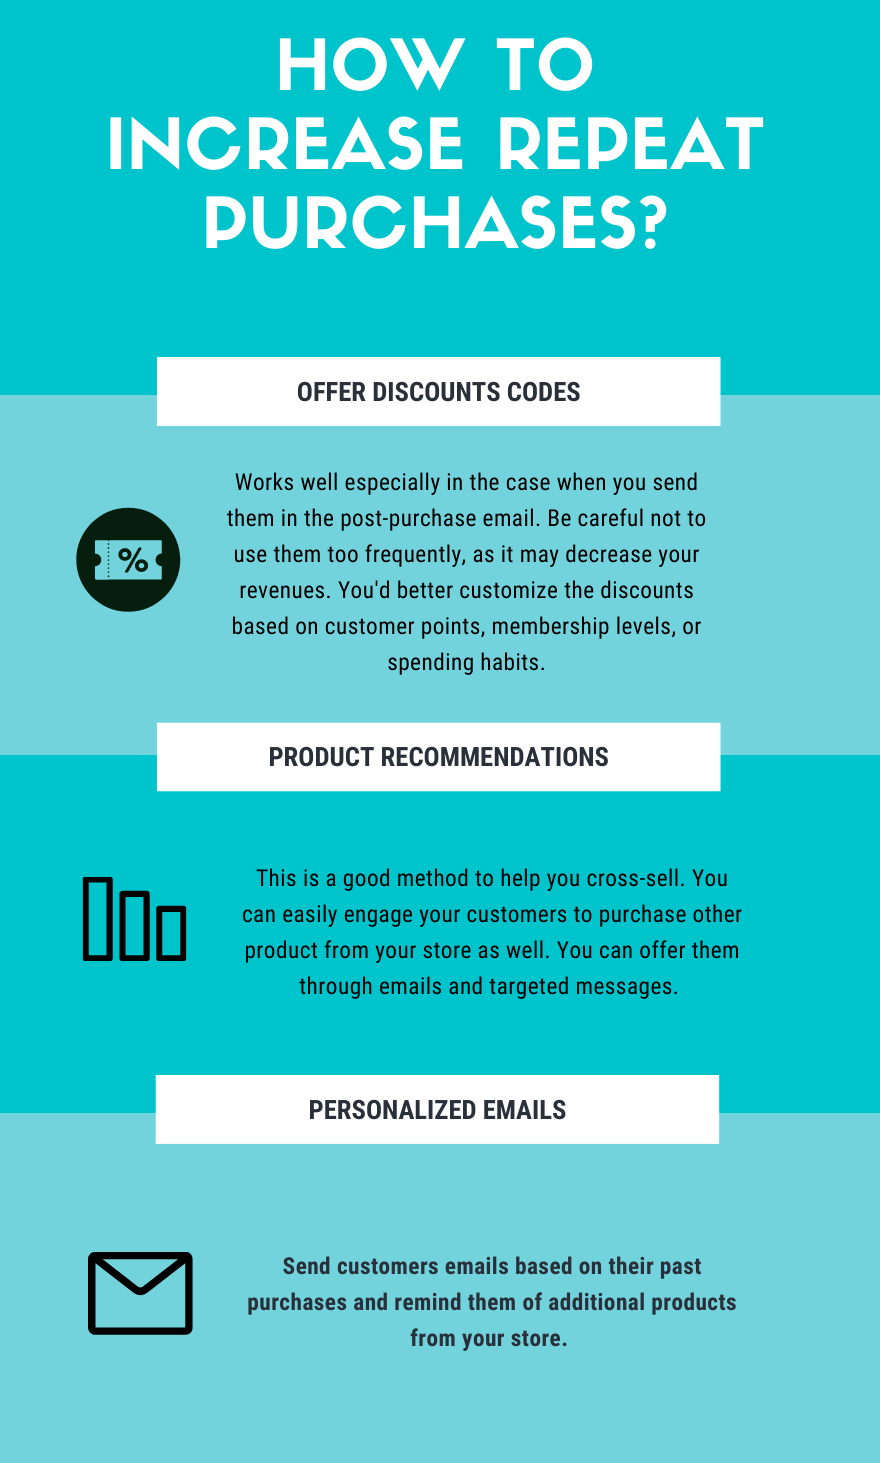 How To Increase Repeat Purchase From Your Customers? - eSwap